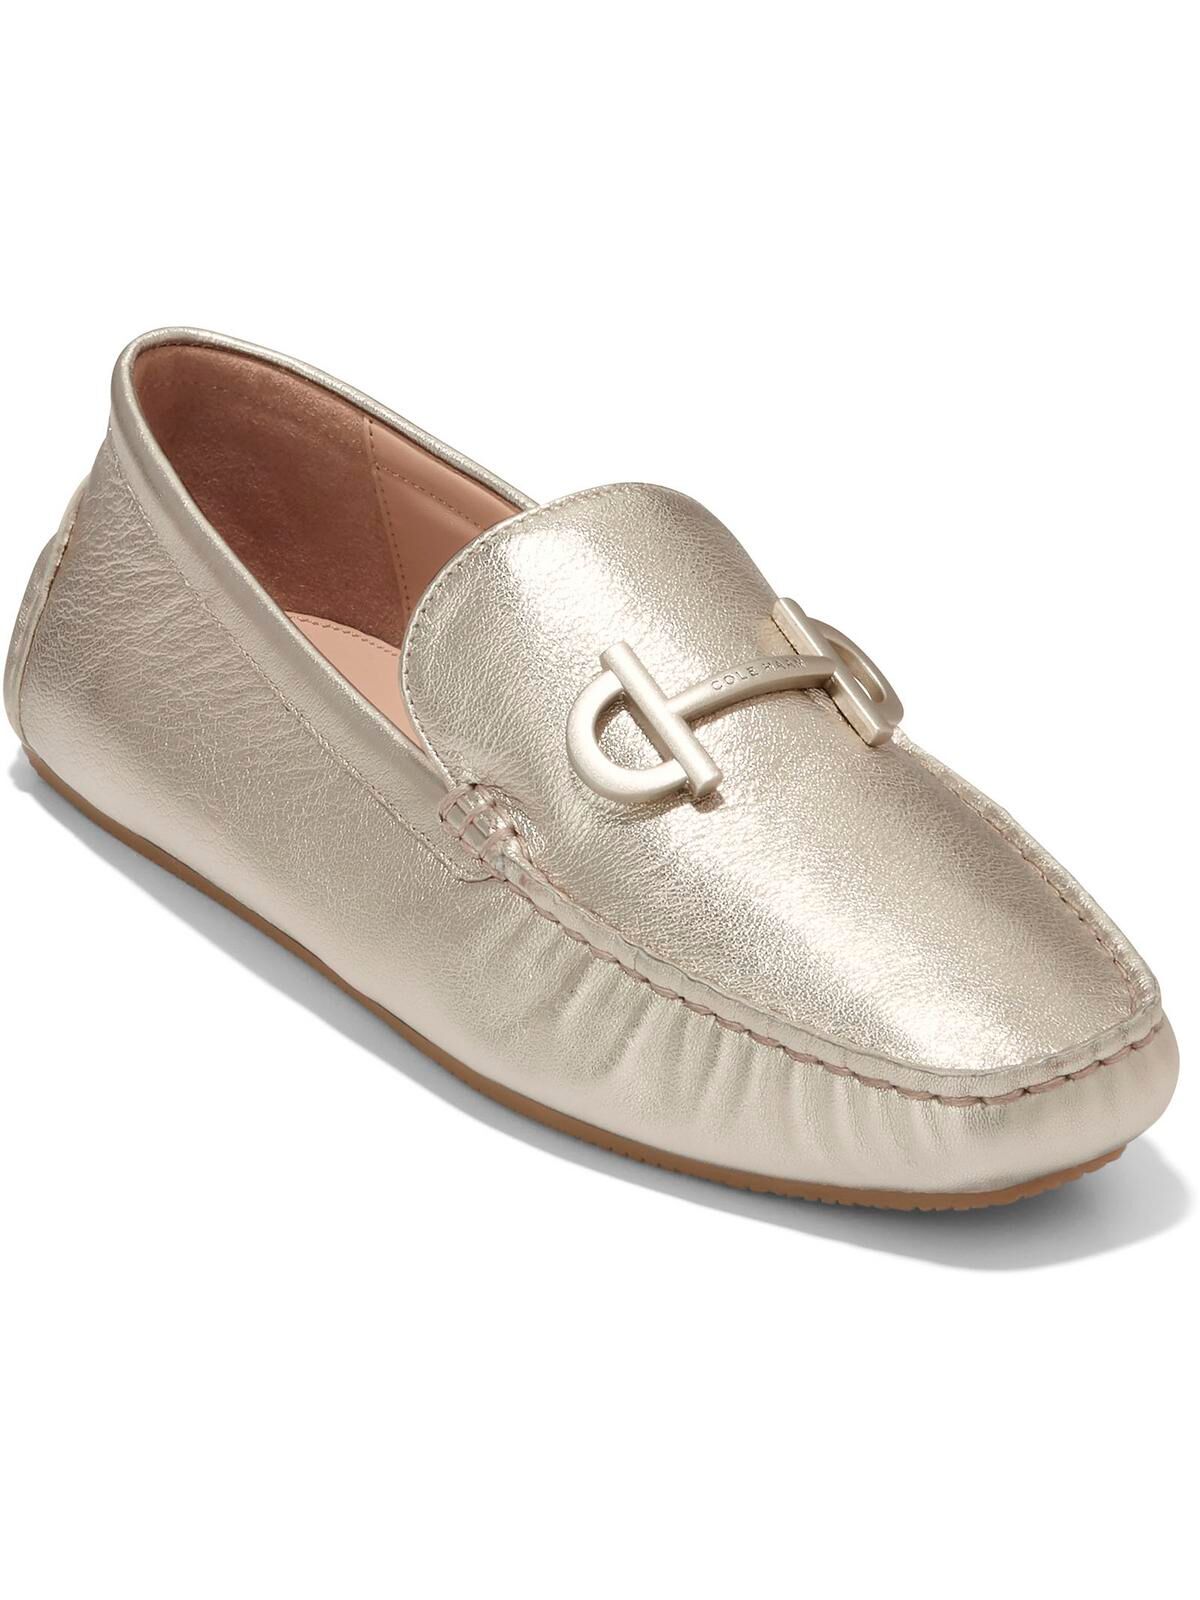 Cole Haan Tully Driver Womens Leather Embossed Loafers US 7 female